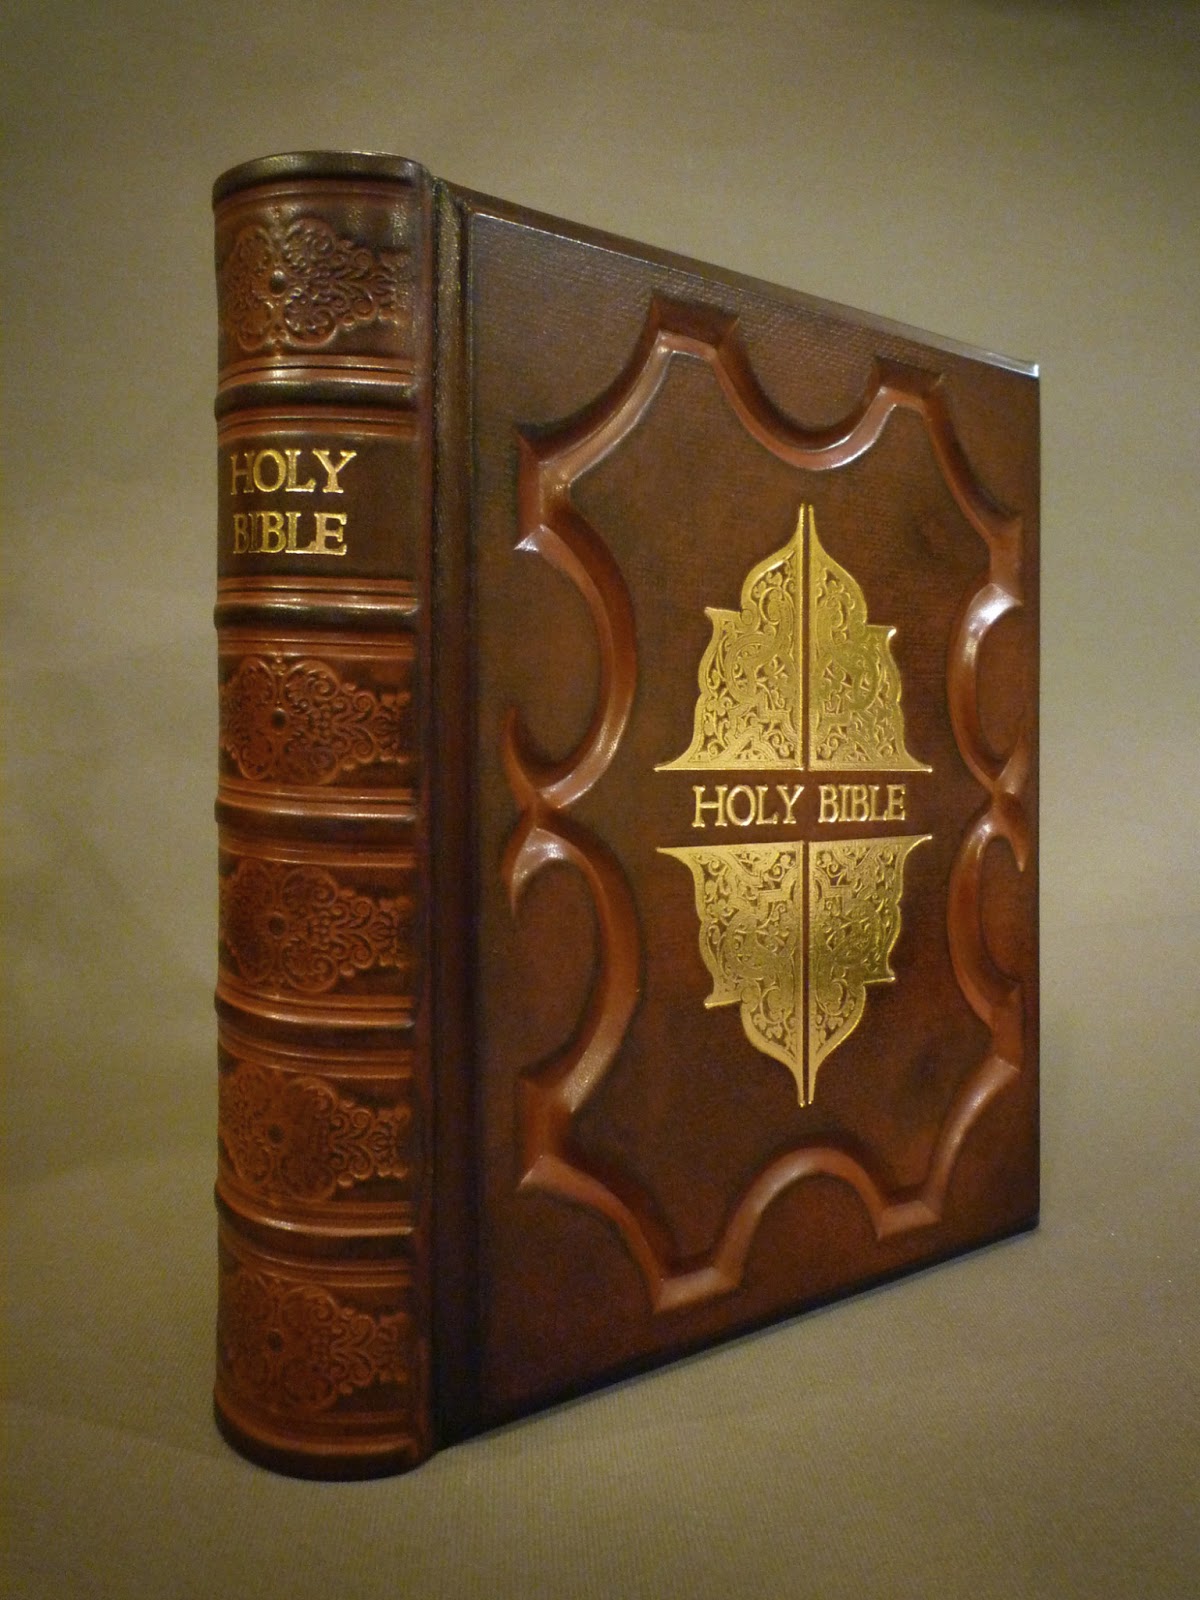 Bookbinder's Chronicle: The Holy Bible by Montgomety Ward ...